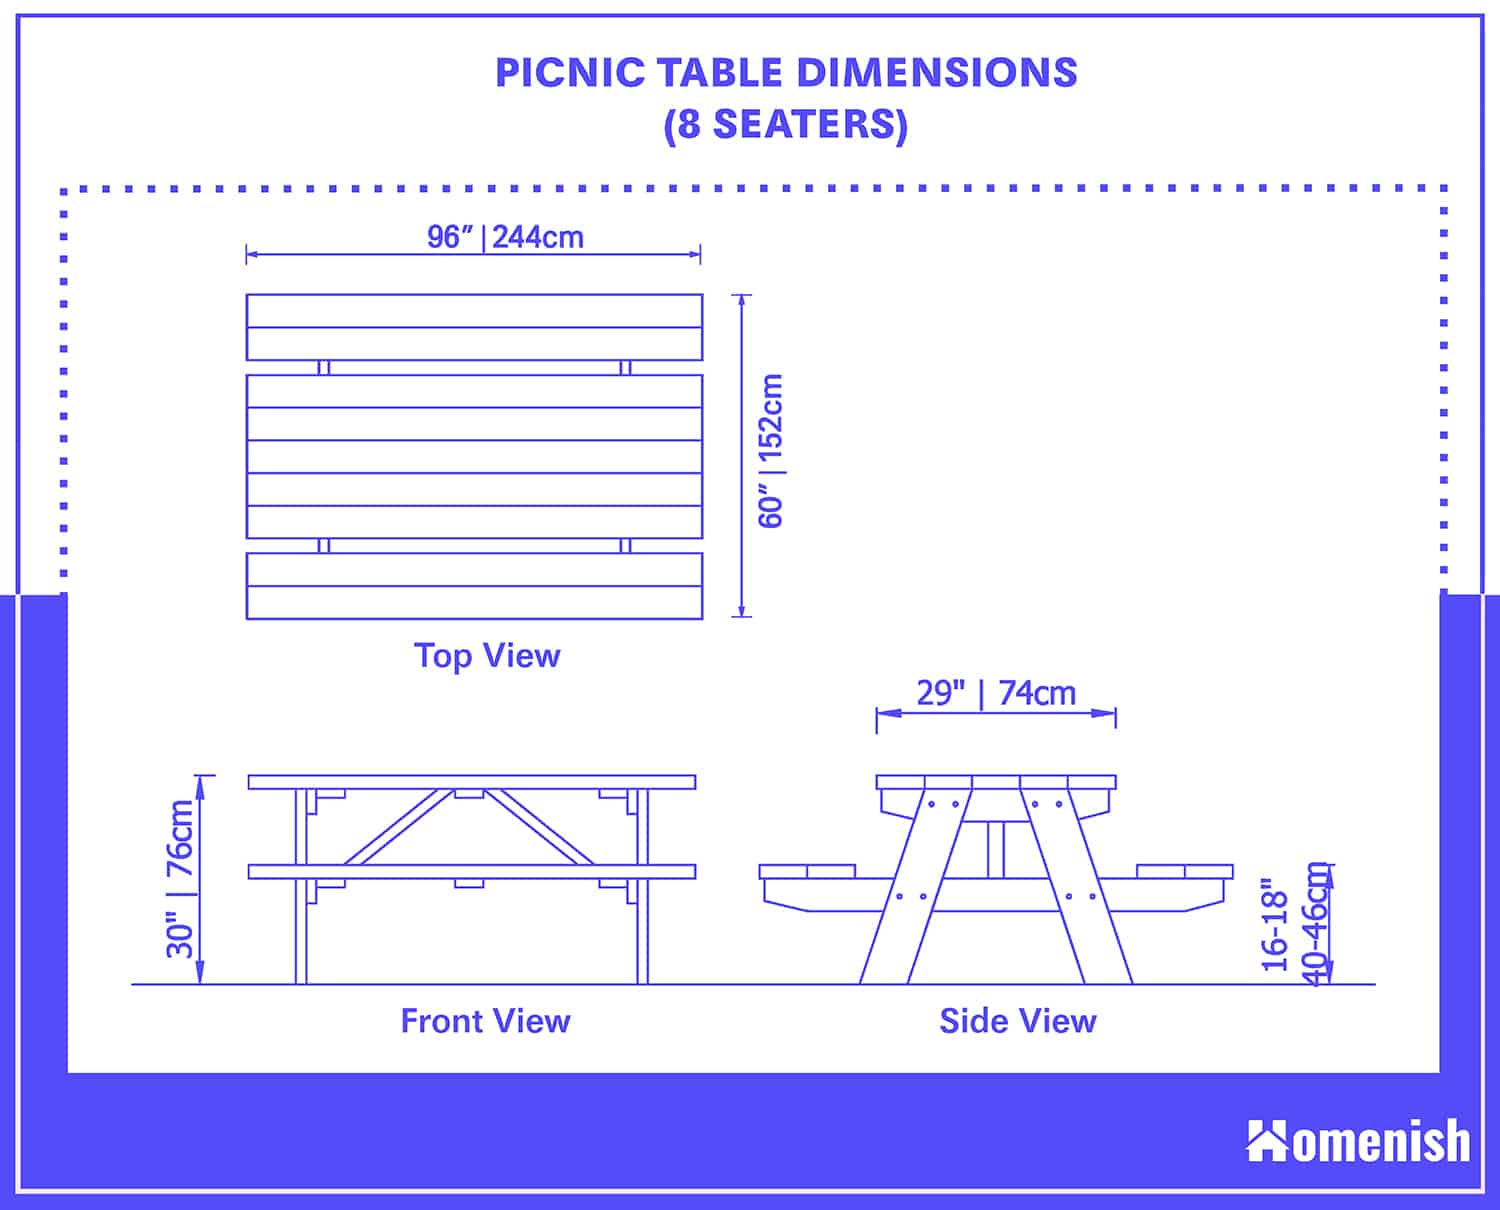 Standard Picnic Table Dimensions With, How Wide Is A Picnic Table Seat